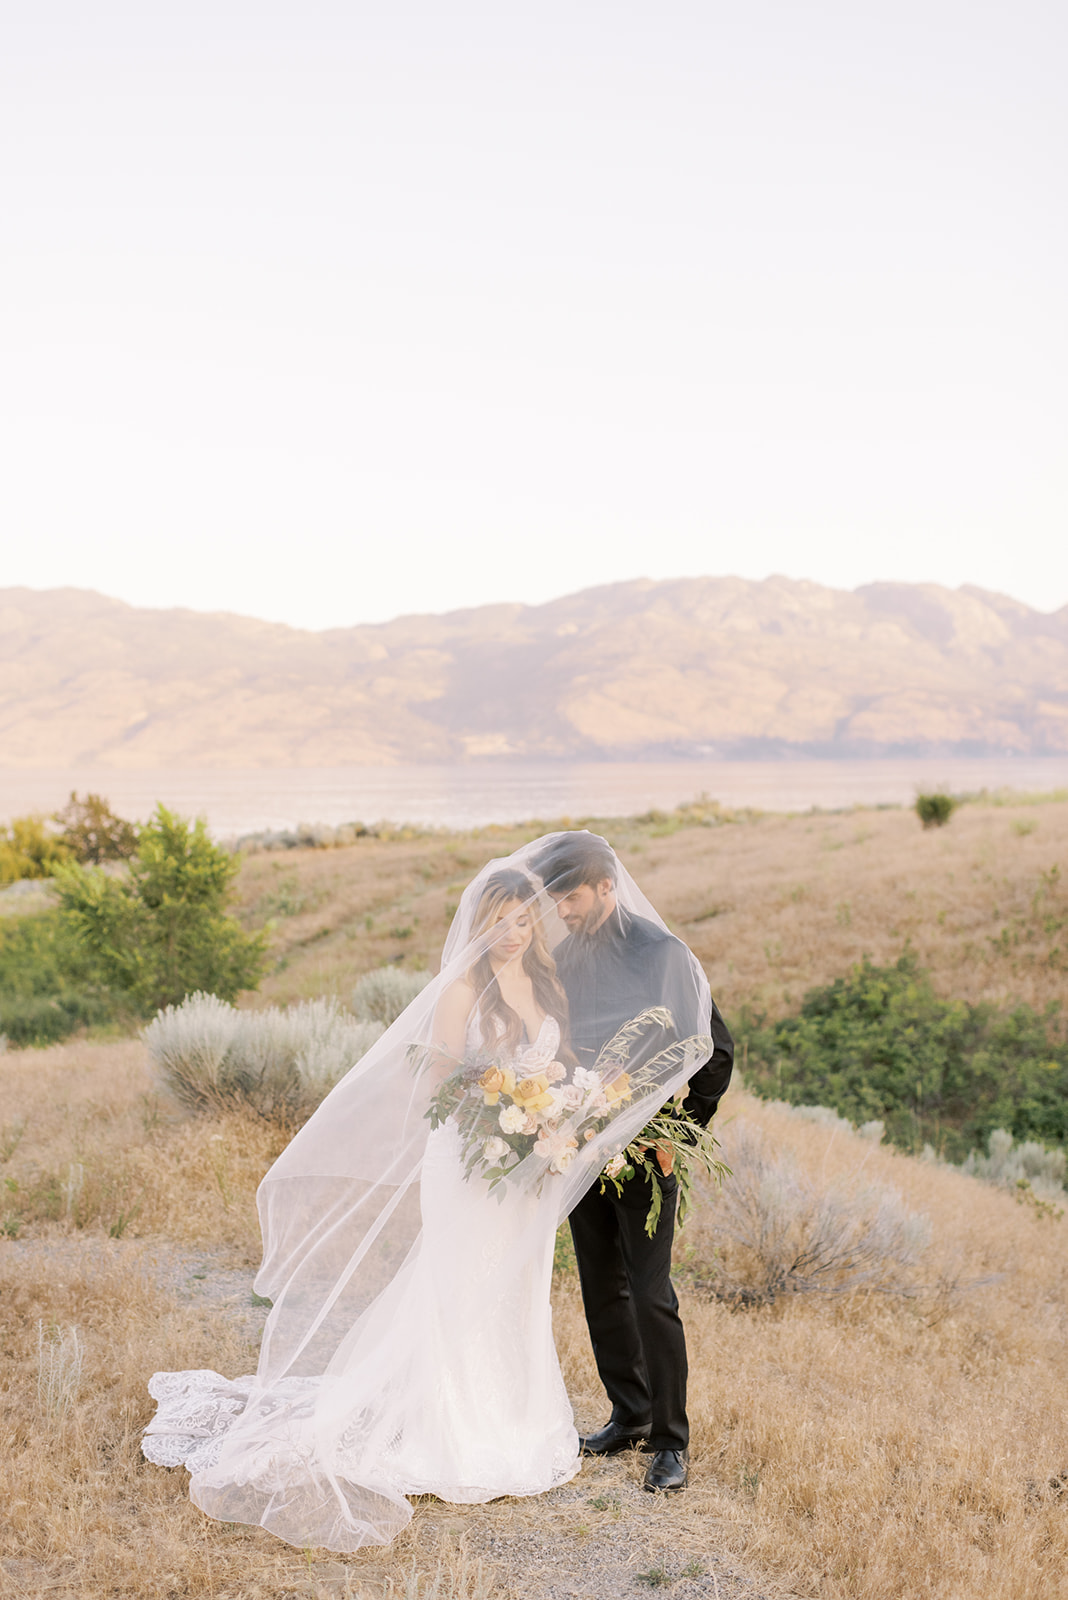 Veil portrait of bride and groom at sunset